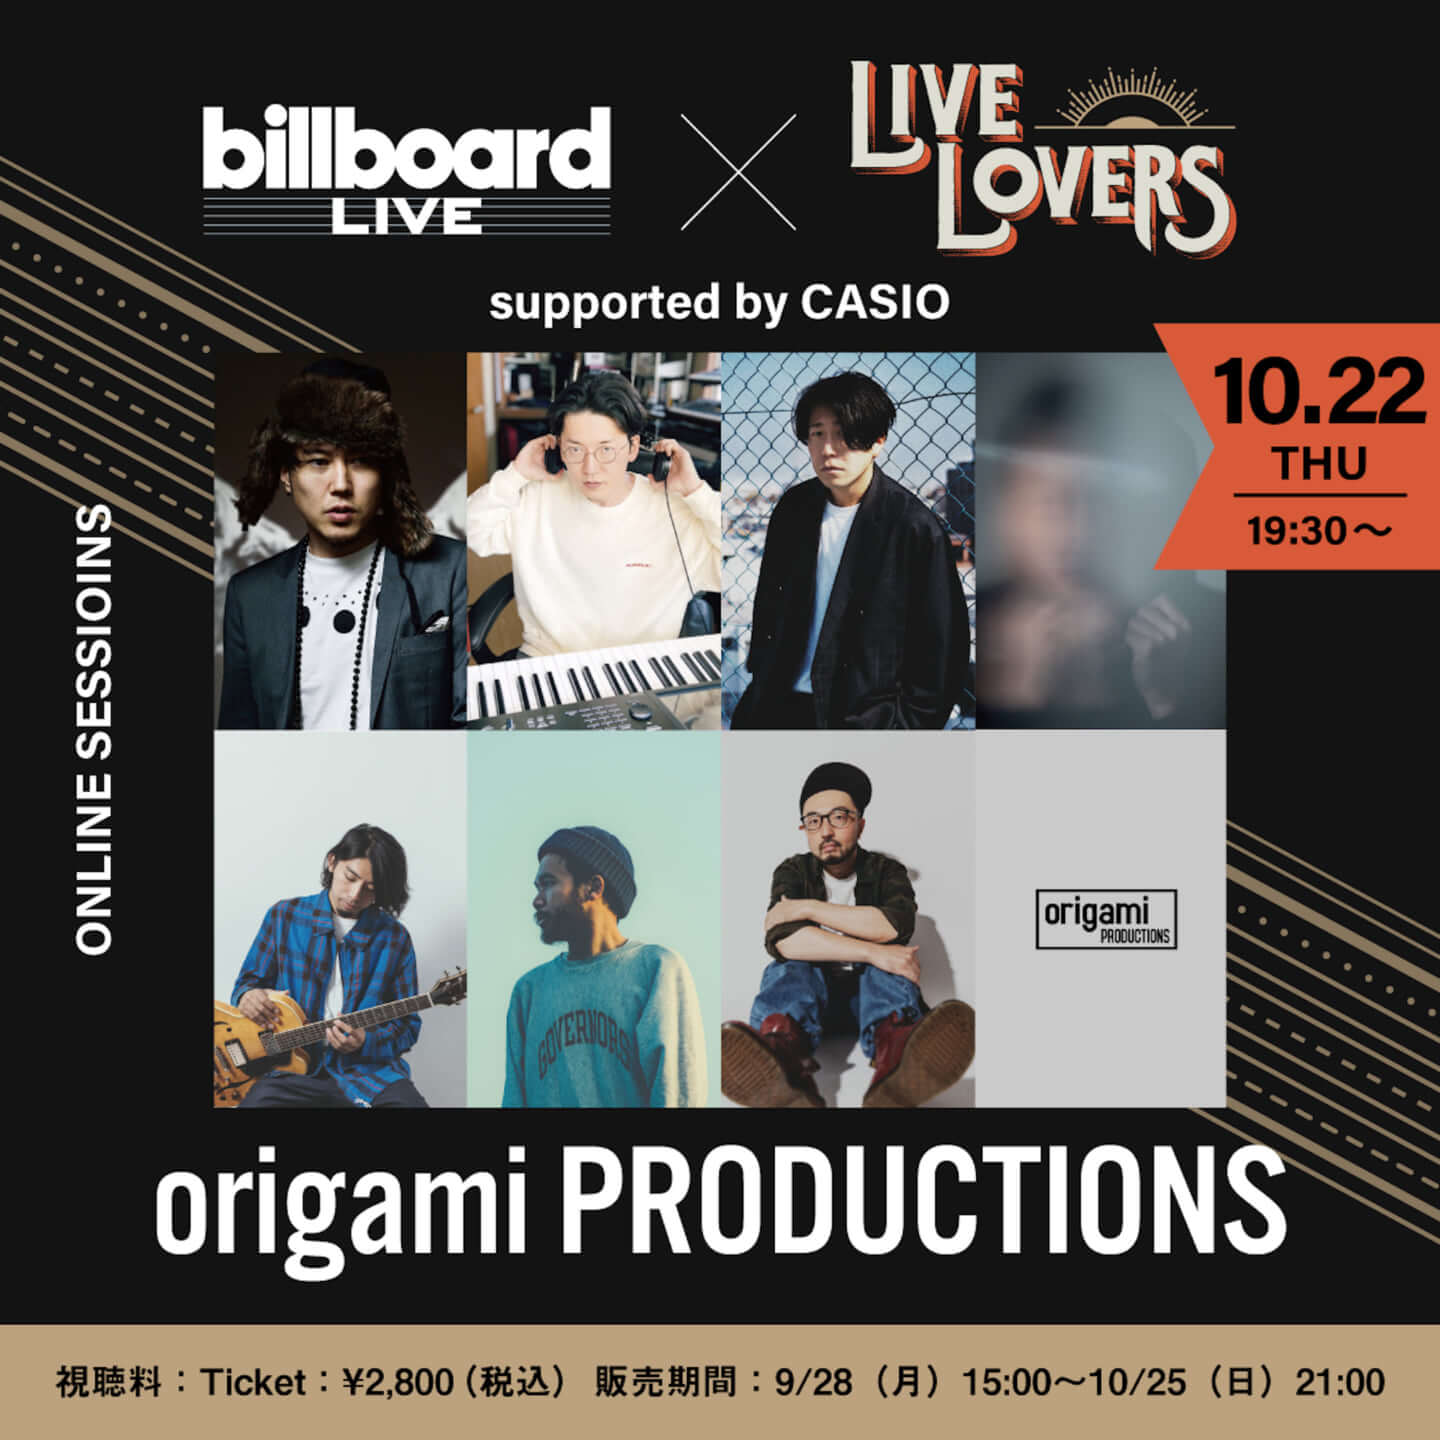 origami PRODUCTIONS ONLINE SESSIONS ～LIVE LOVERS～ from Billboard Live supported by CASIO